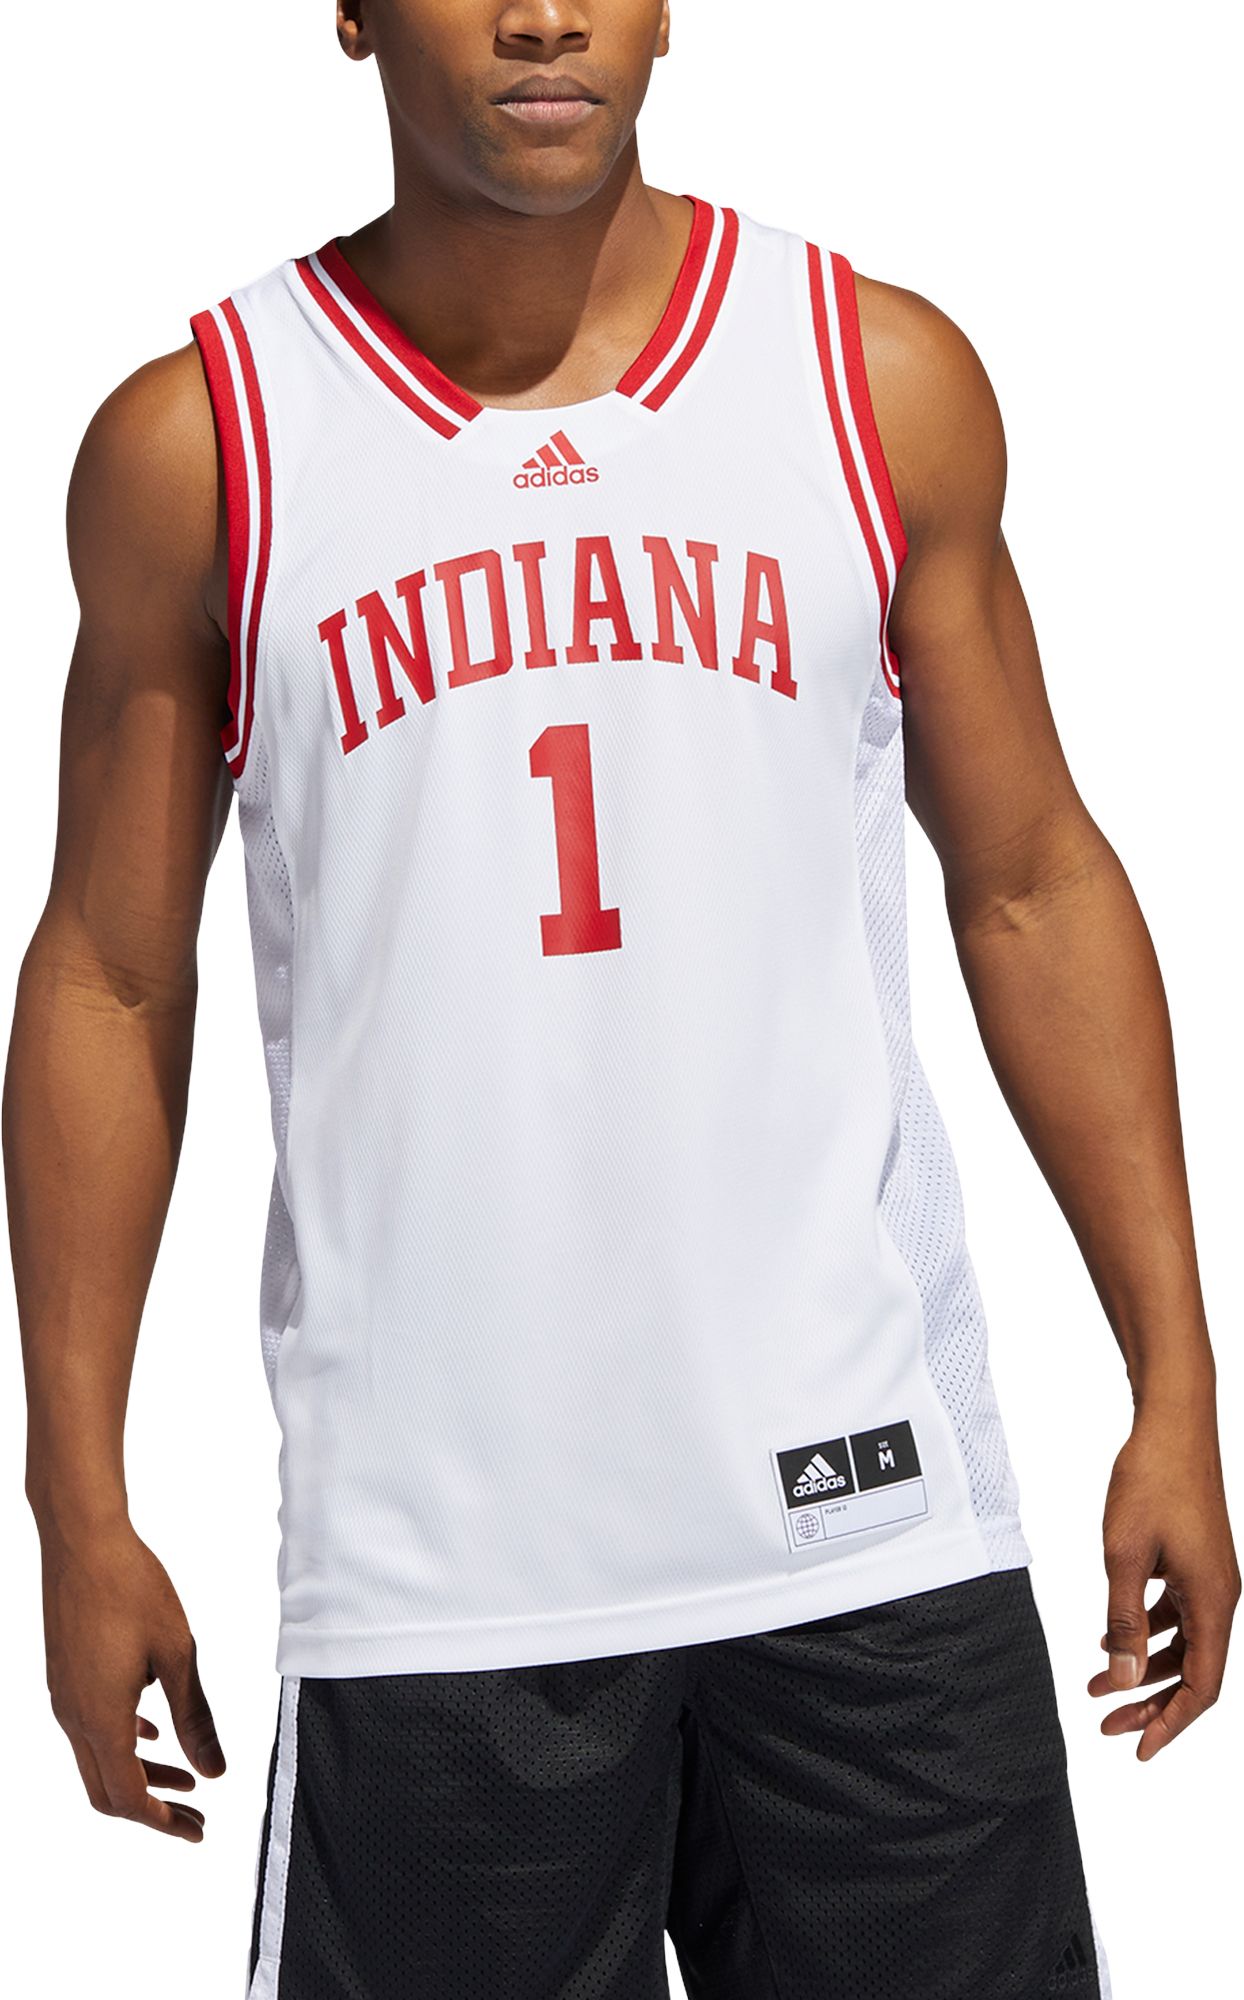 Hoosiers Assembly Hall jersey